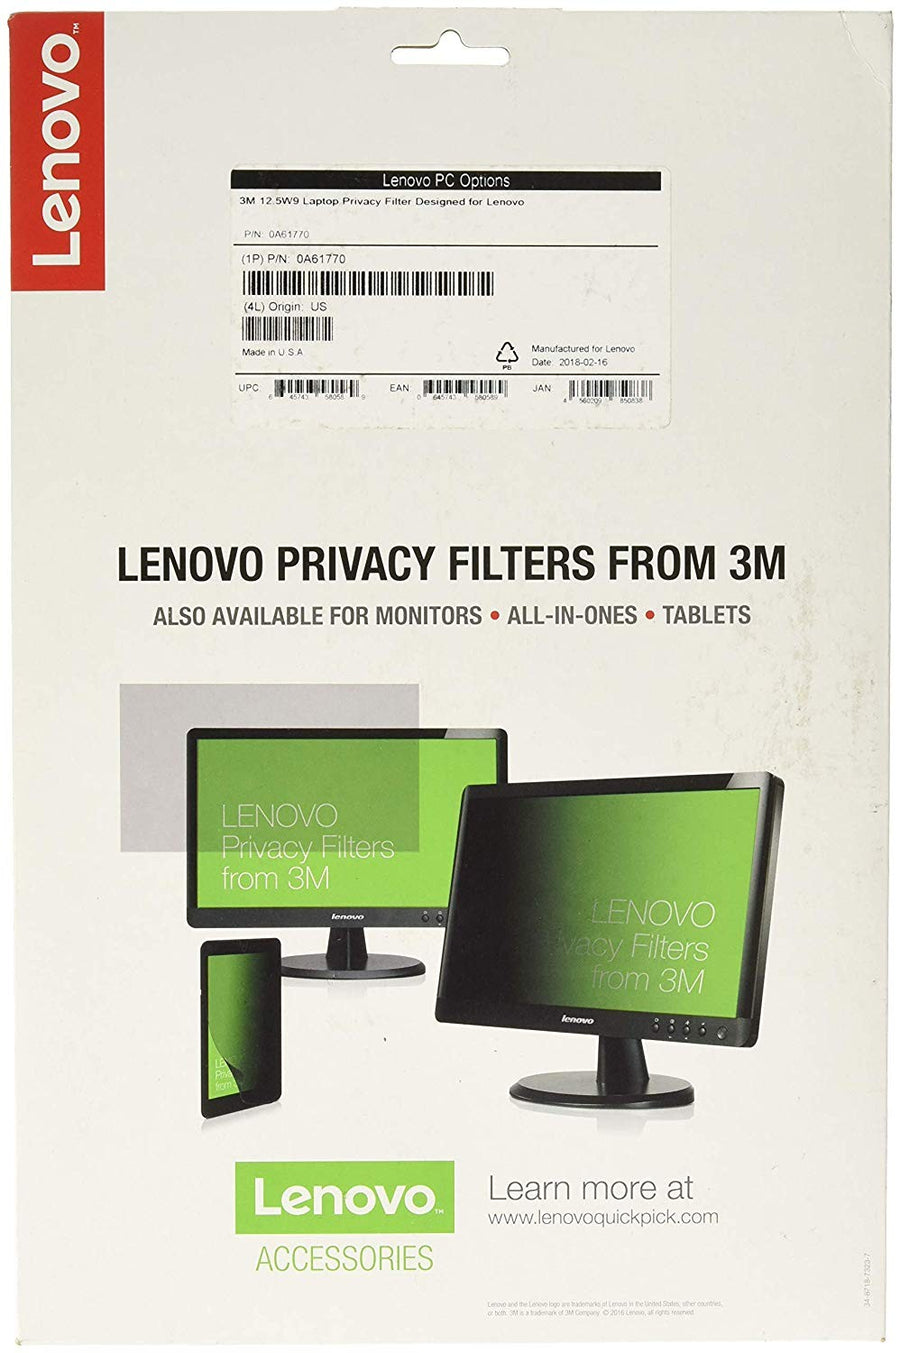 Lenovo 0A61770 Privacy Filter For 12.5 Laptop